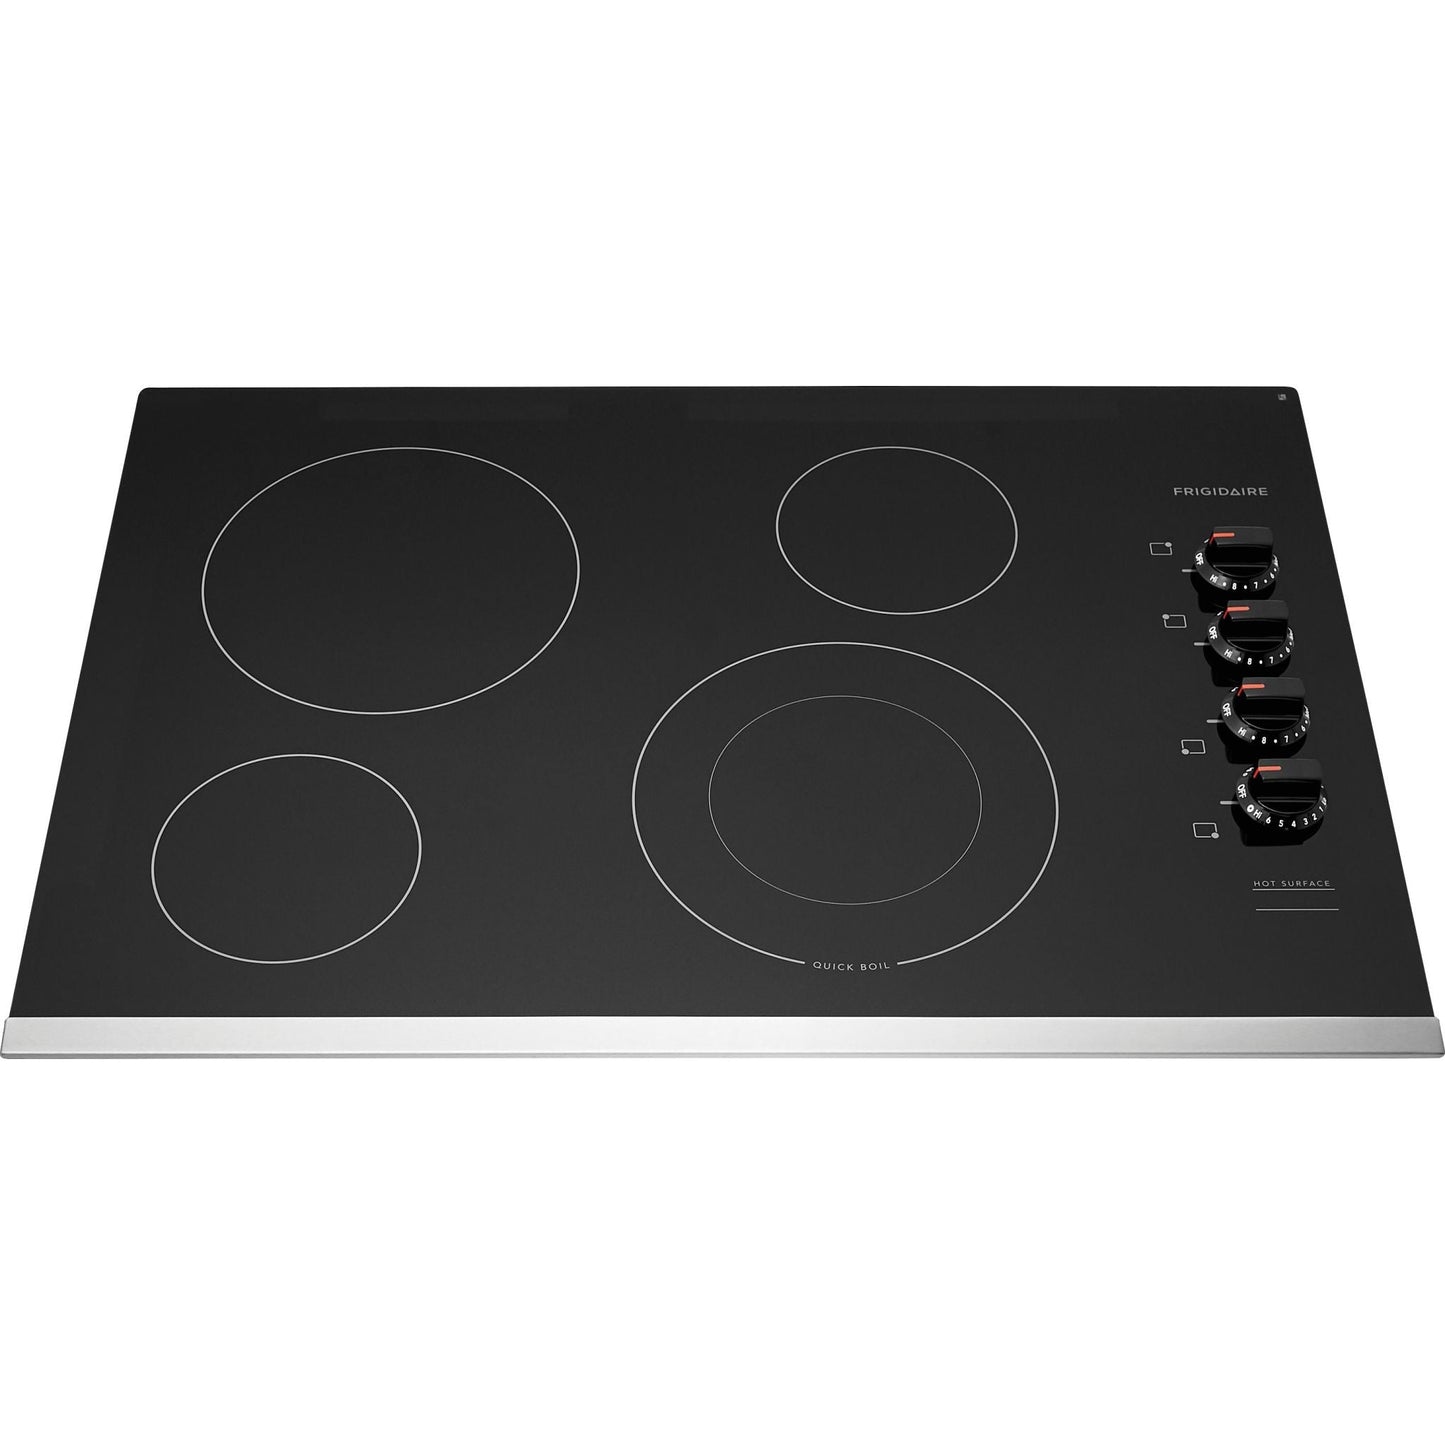 Frigidaire 30" Cooktop (FFEC3025US) - Stainless Steel